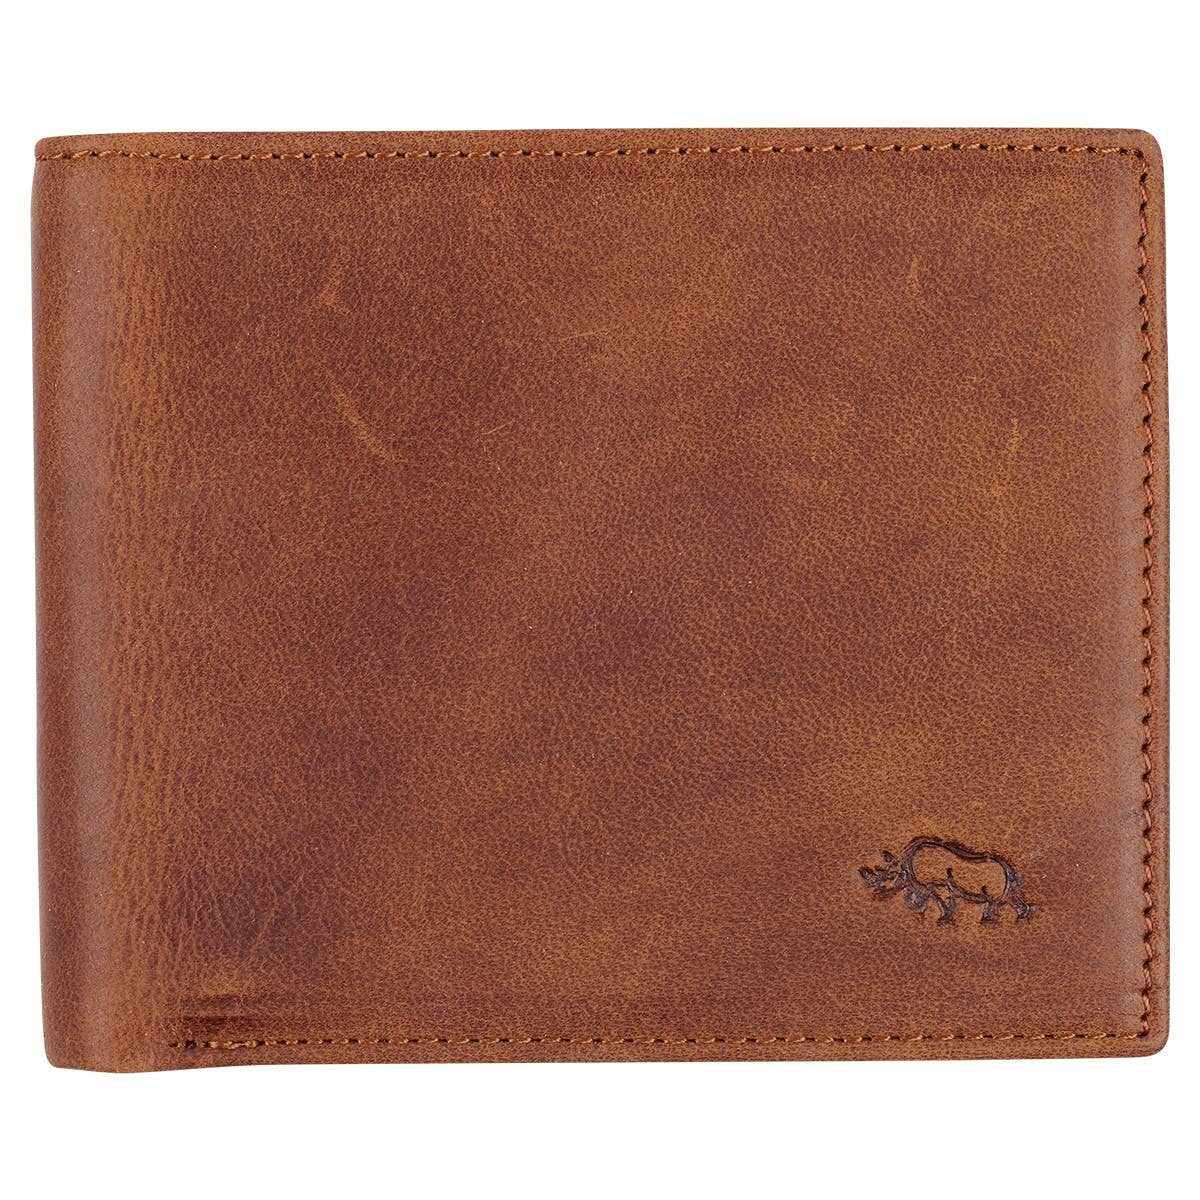 BROWN SOFT GRAIN LEATHER BILLFOLD WALLET WITH LIME GREEN TRIM COLE BROTHERS 